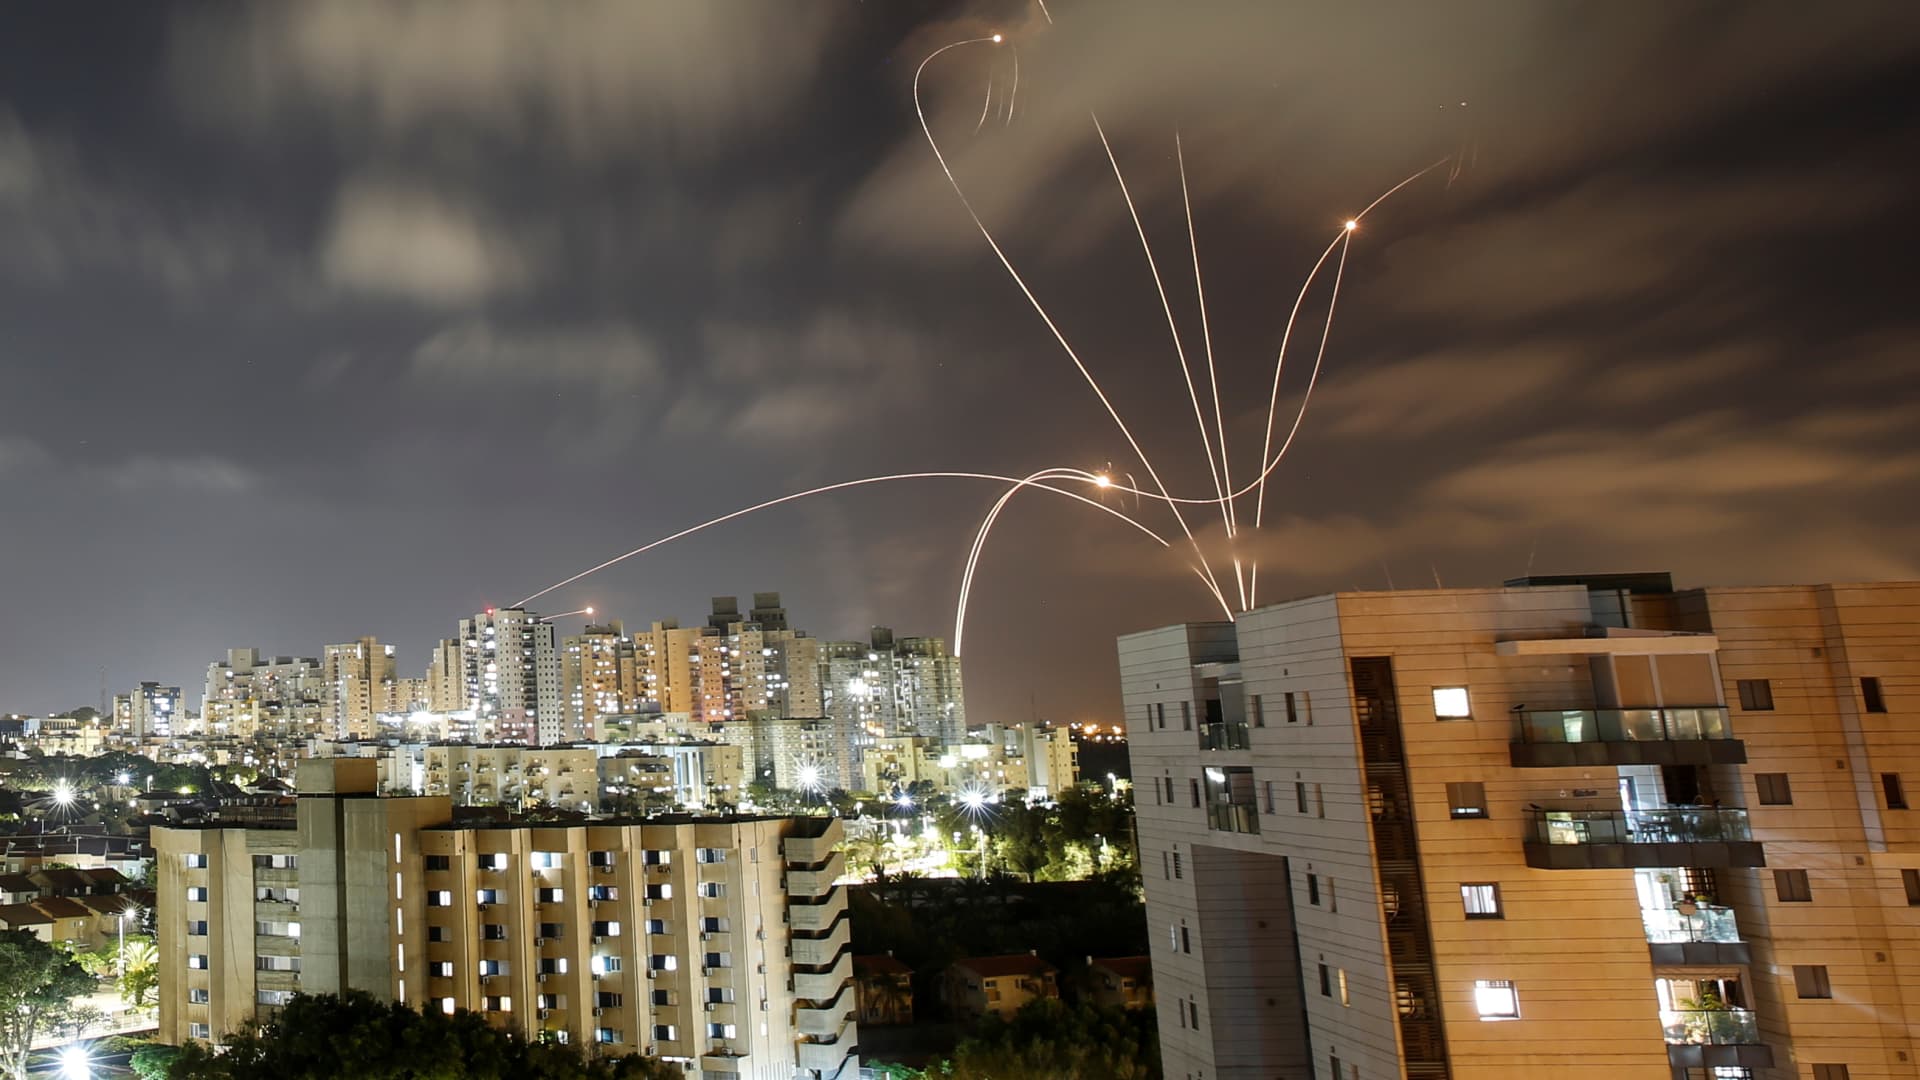 Streaks of light are seen as Israel's Iron Dome anti-missile system intercepts rockets launched from the Gaza Strip toward Israel, as seen from Ashkelon, Israel May 12, 2021.